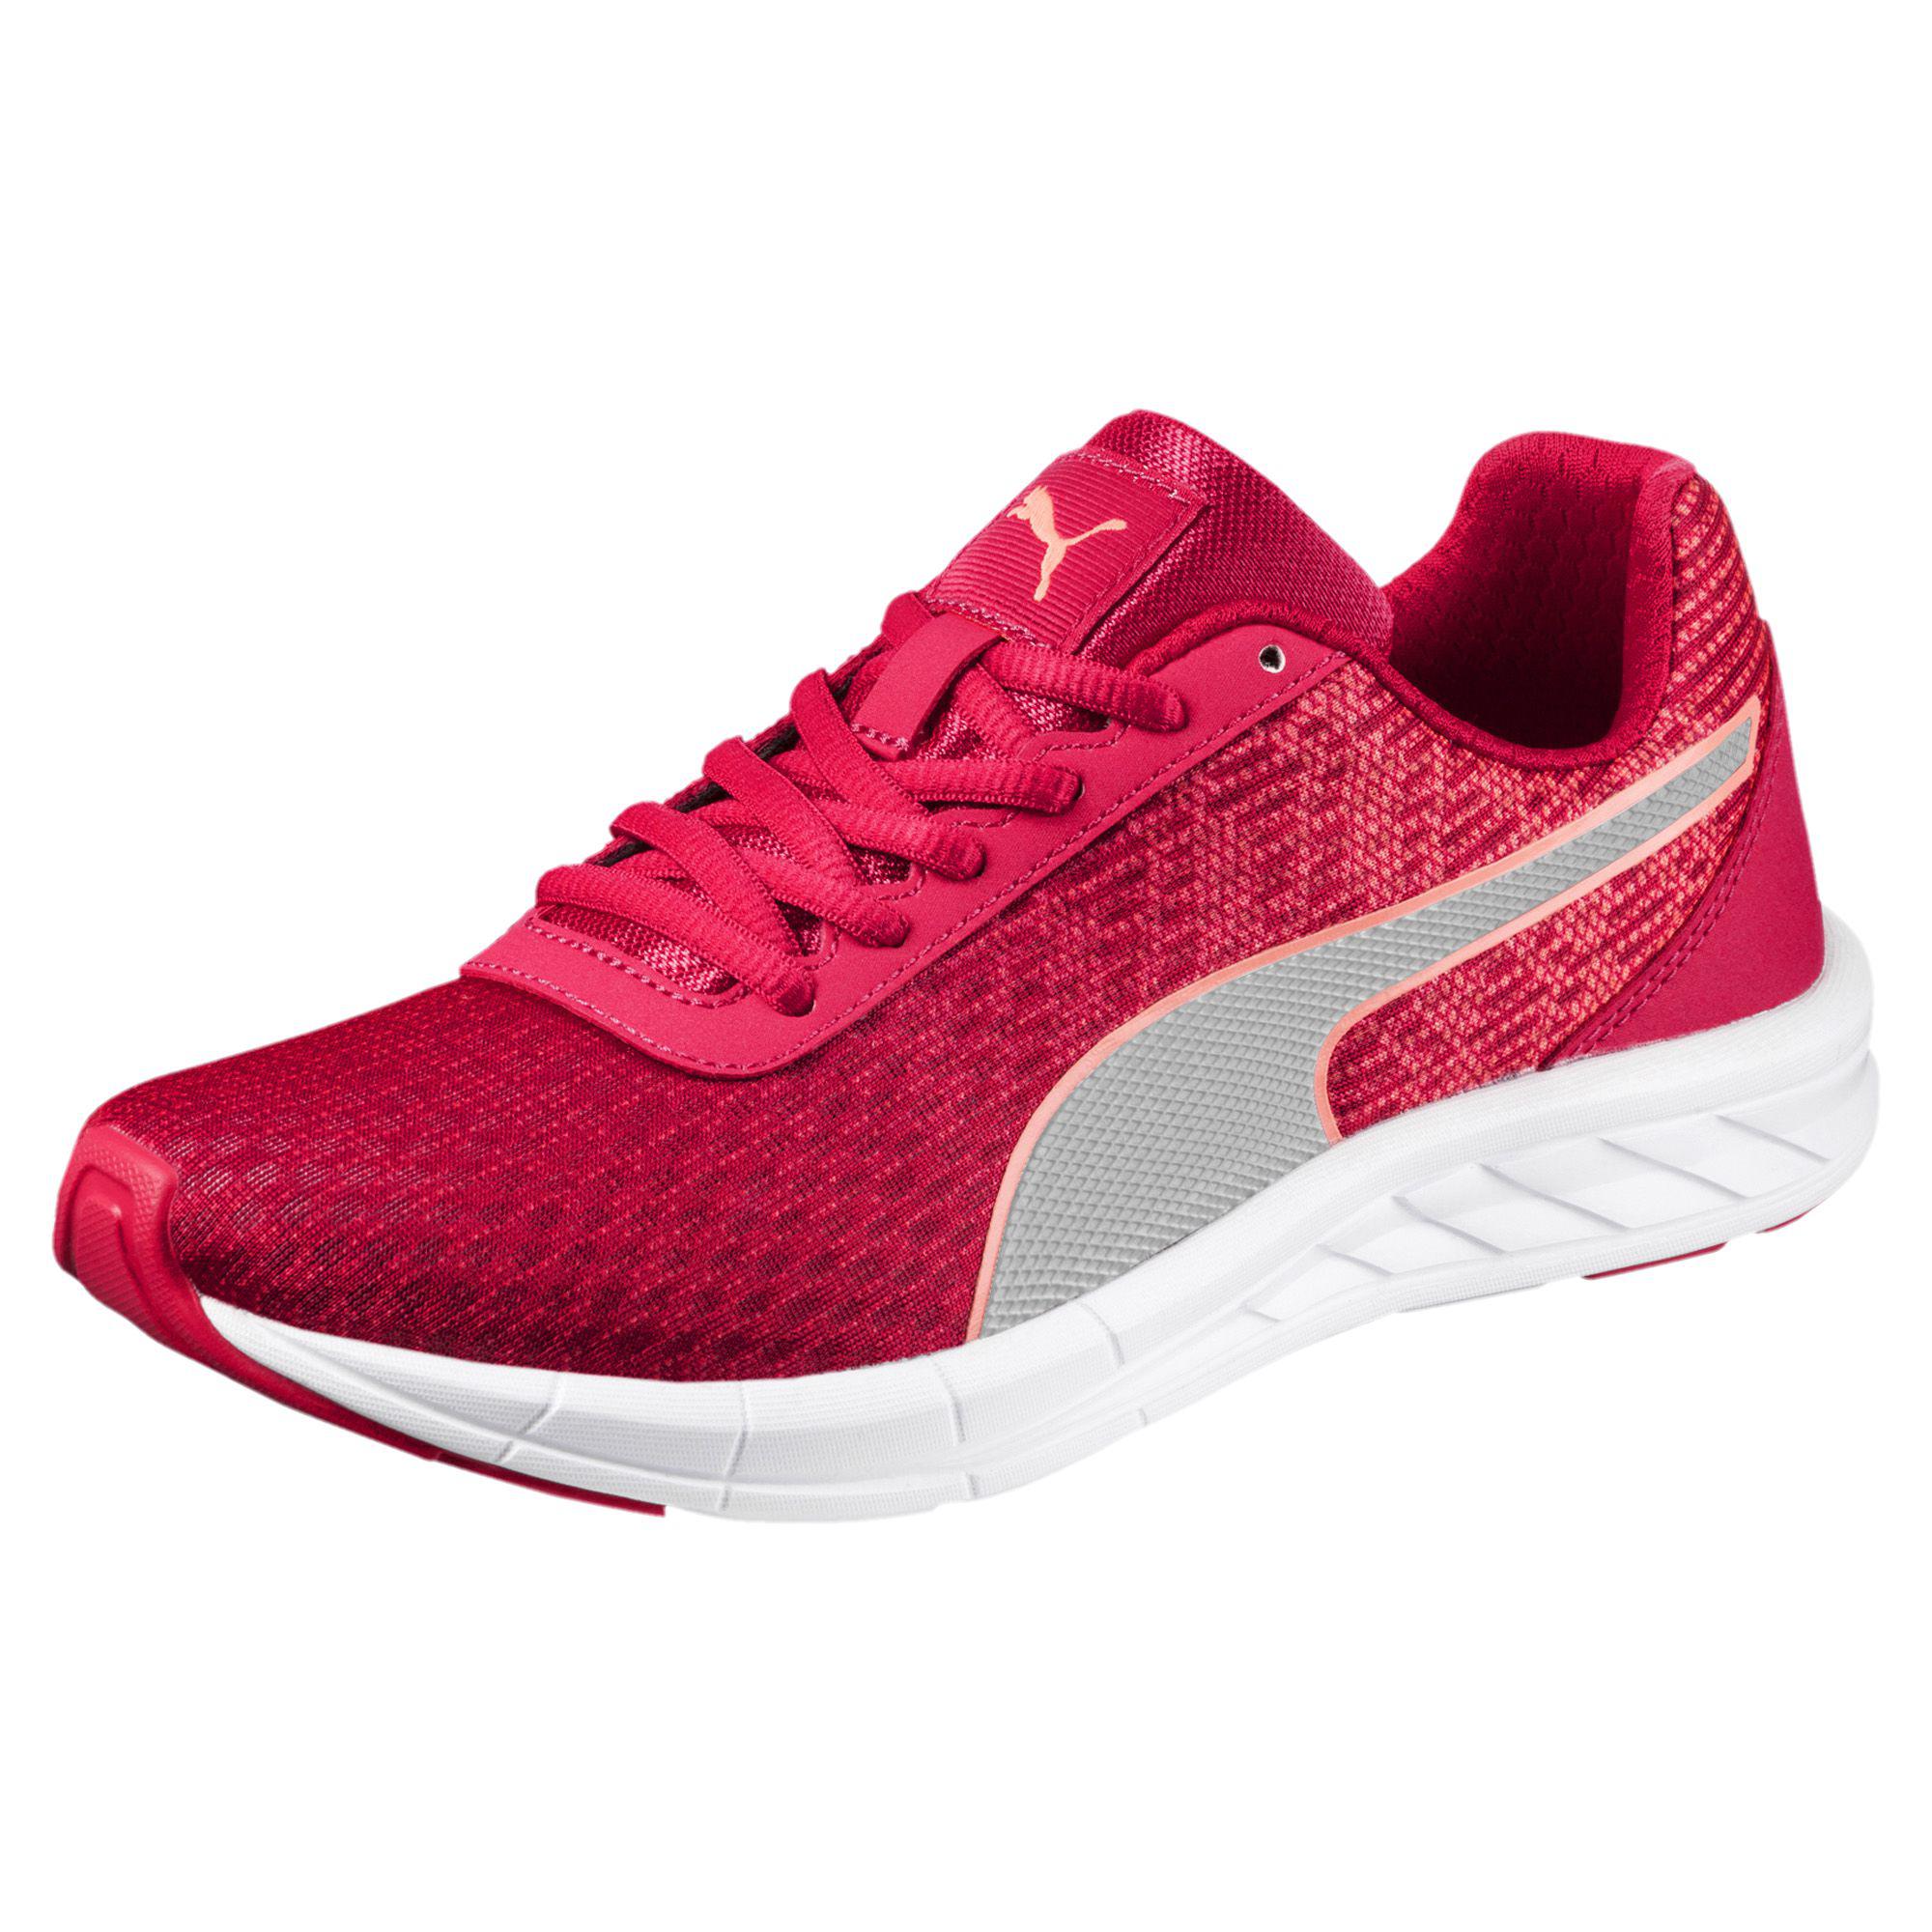 Lyst - Puma Comet Women's Running Shoes in Red